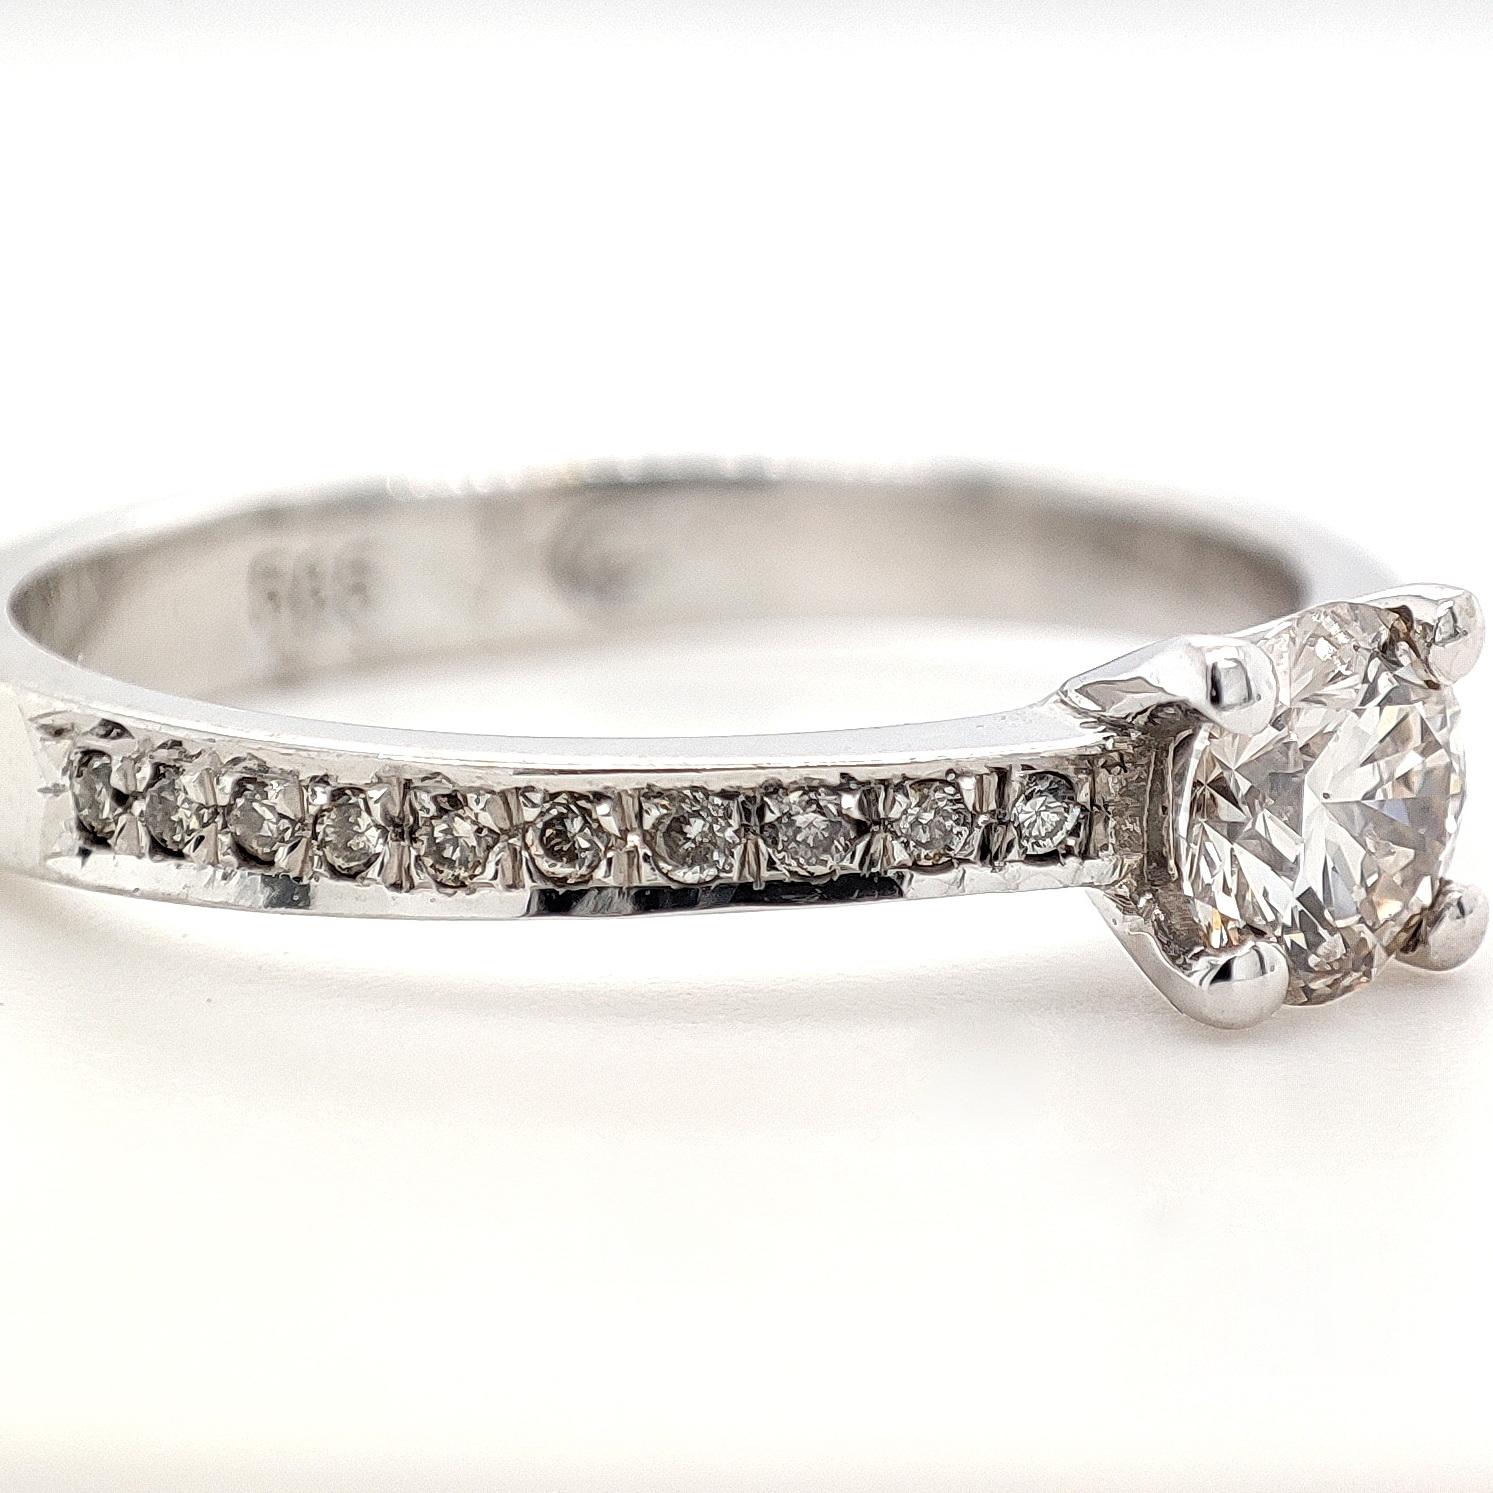 FOR US CUSTOMER NO VAT!

This captivating engagement diamond ring features a total carat weight of 0.63, with a central stone of 0.43 carats and additional side stones totaling 0.20 carats. The diamonds exhibit exceptional clarity, falling within